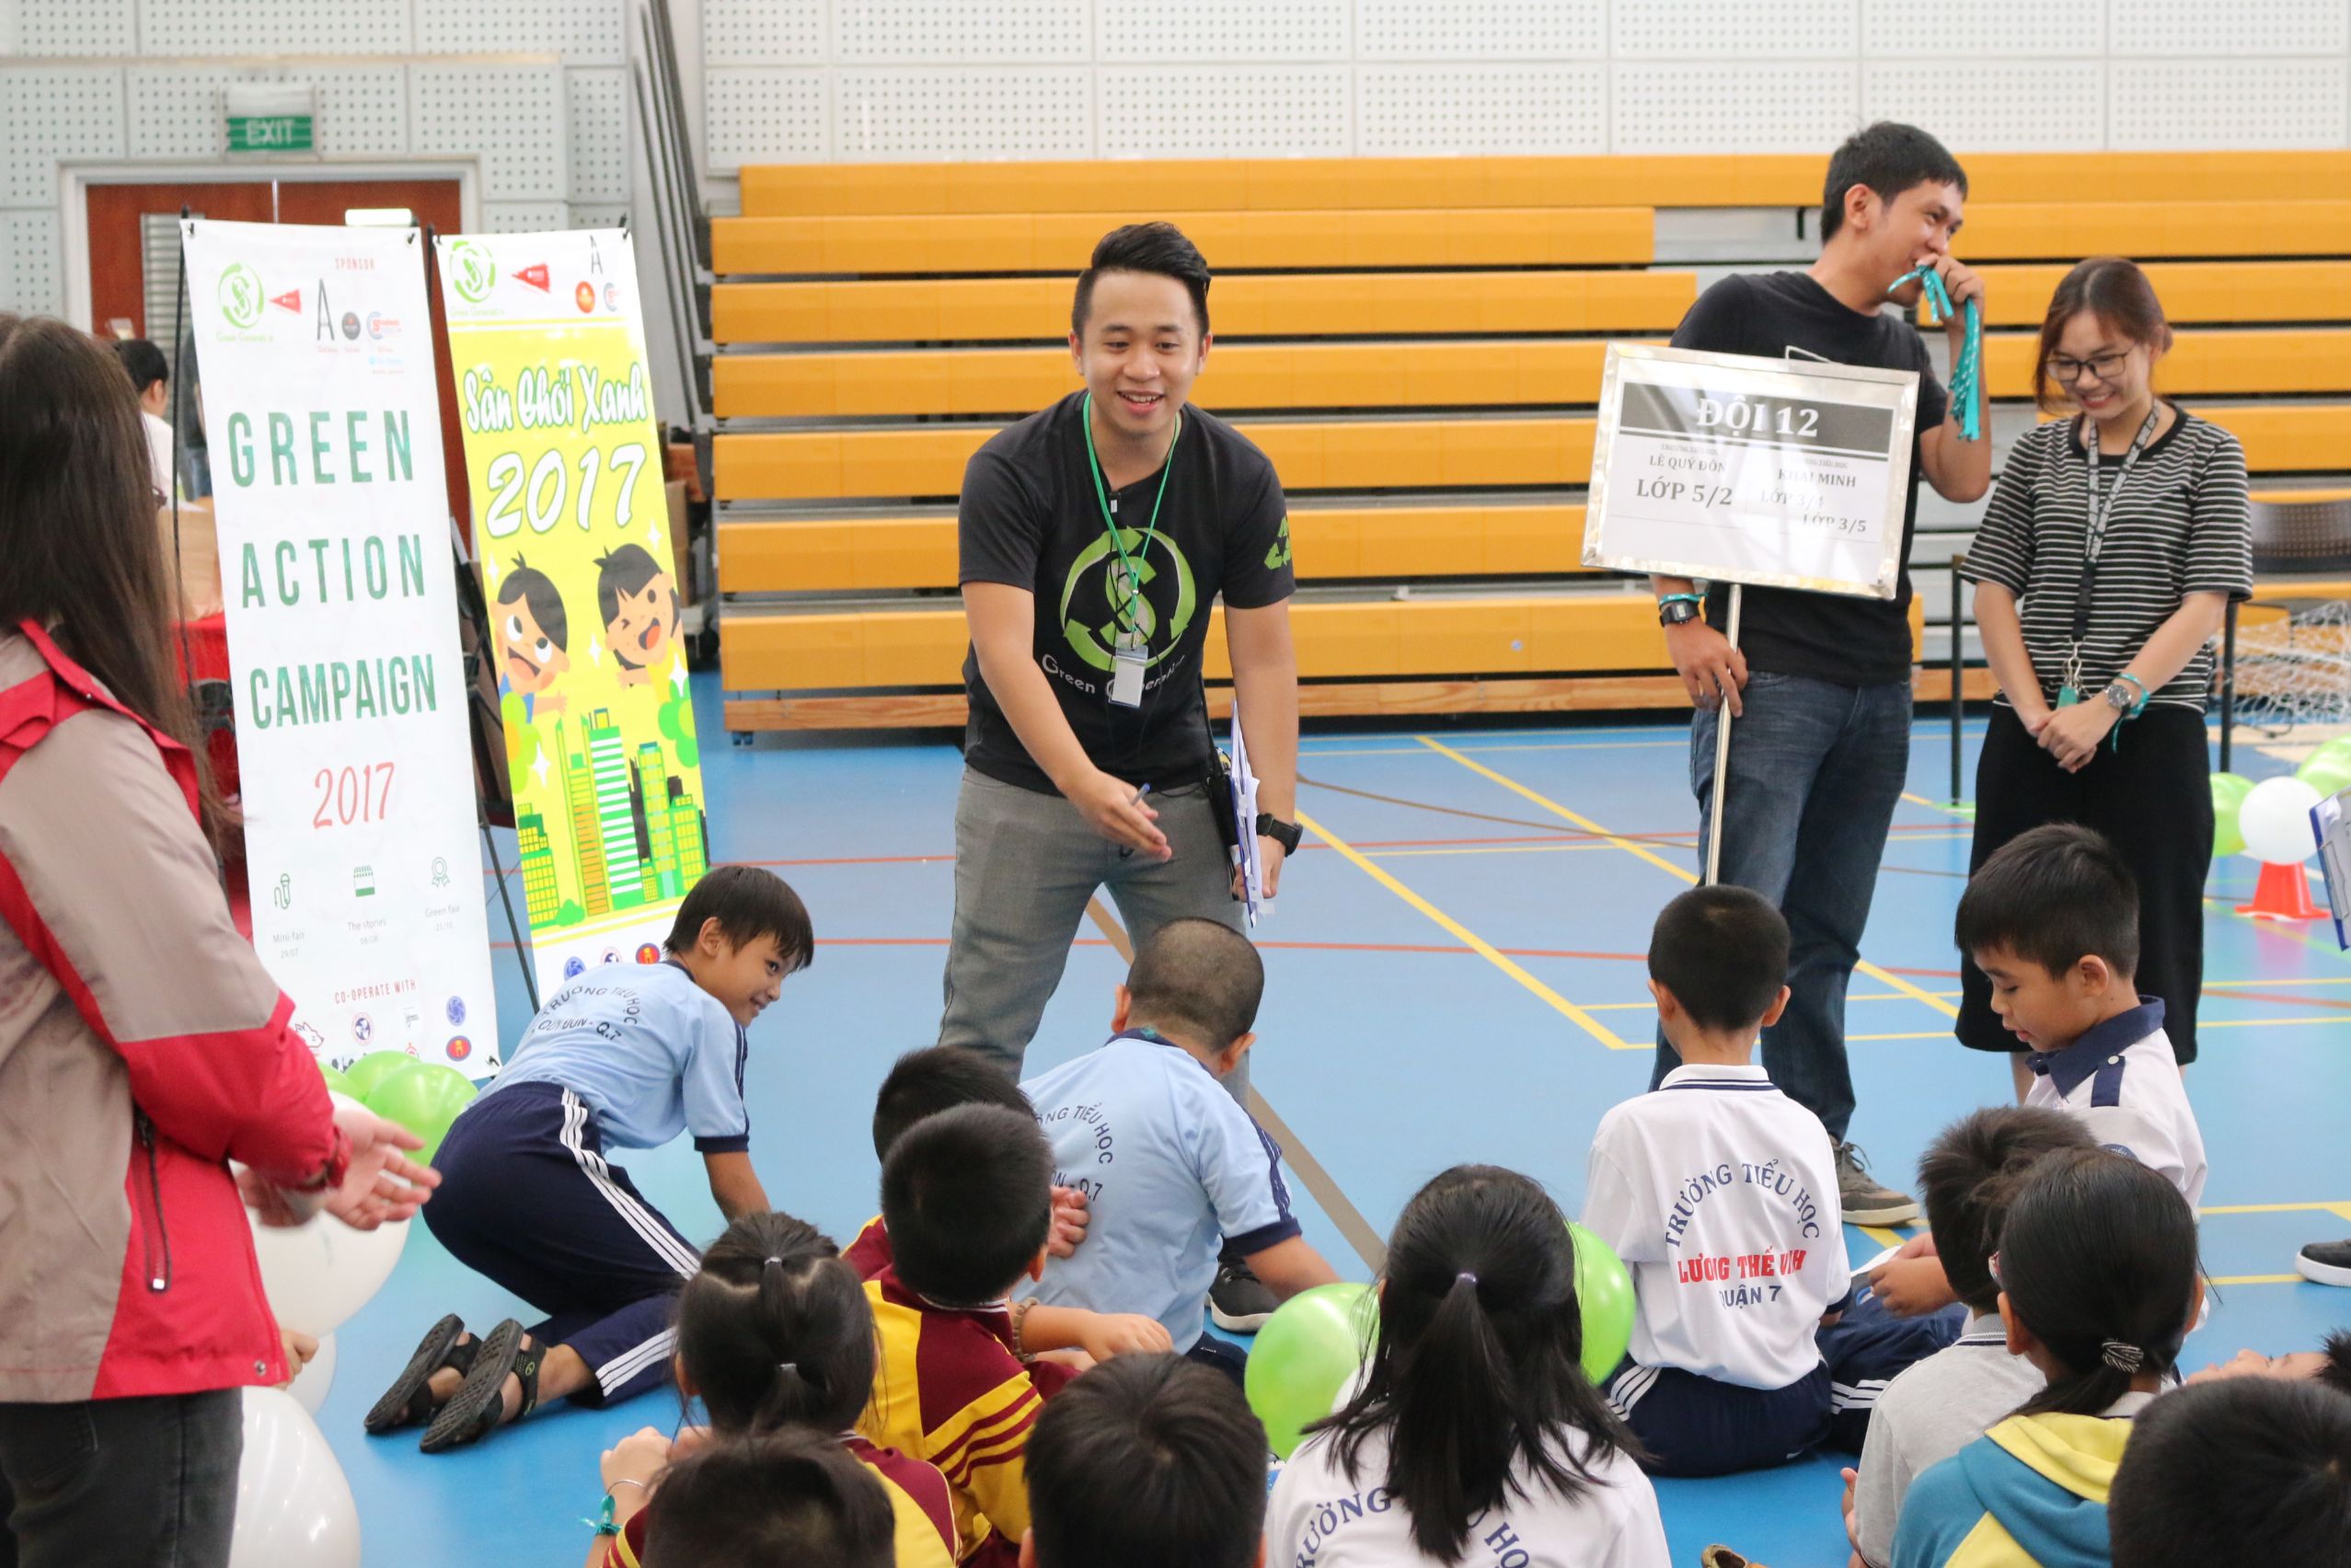 Nguyen Long Hai, RMIT Vietnam Bachelor of Business (Economics and Finance) student and Vice-President of Green Generation, shared that the club also presented gifts to 12 disadvantaged students who are fond of learning. 